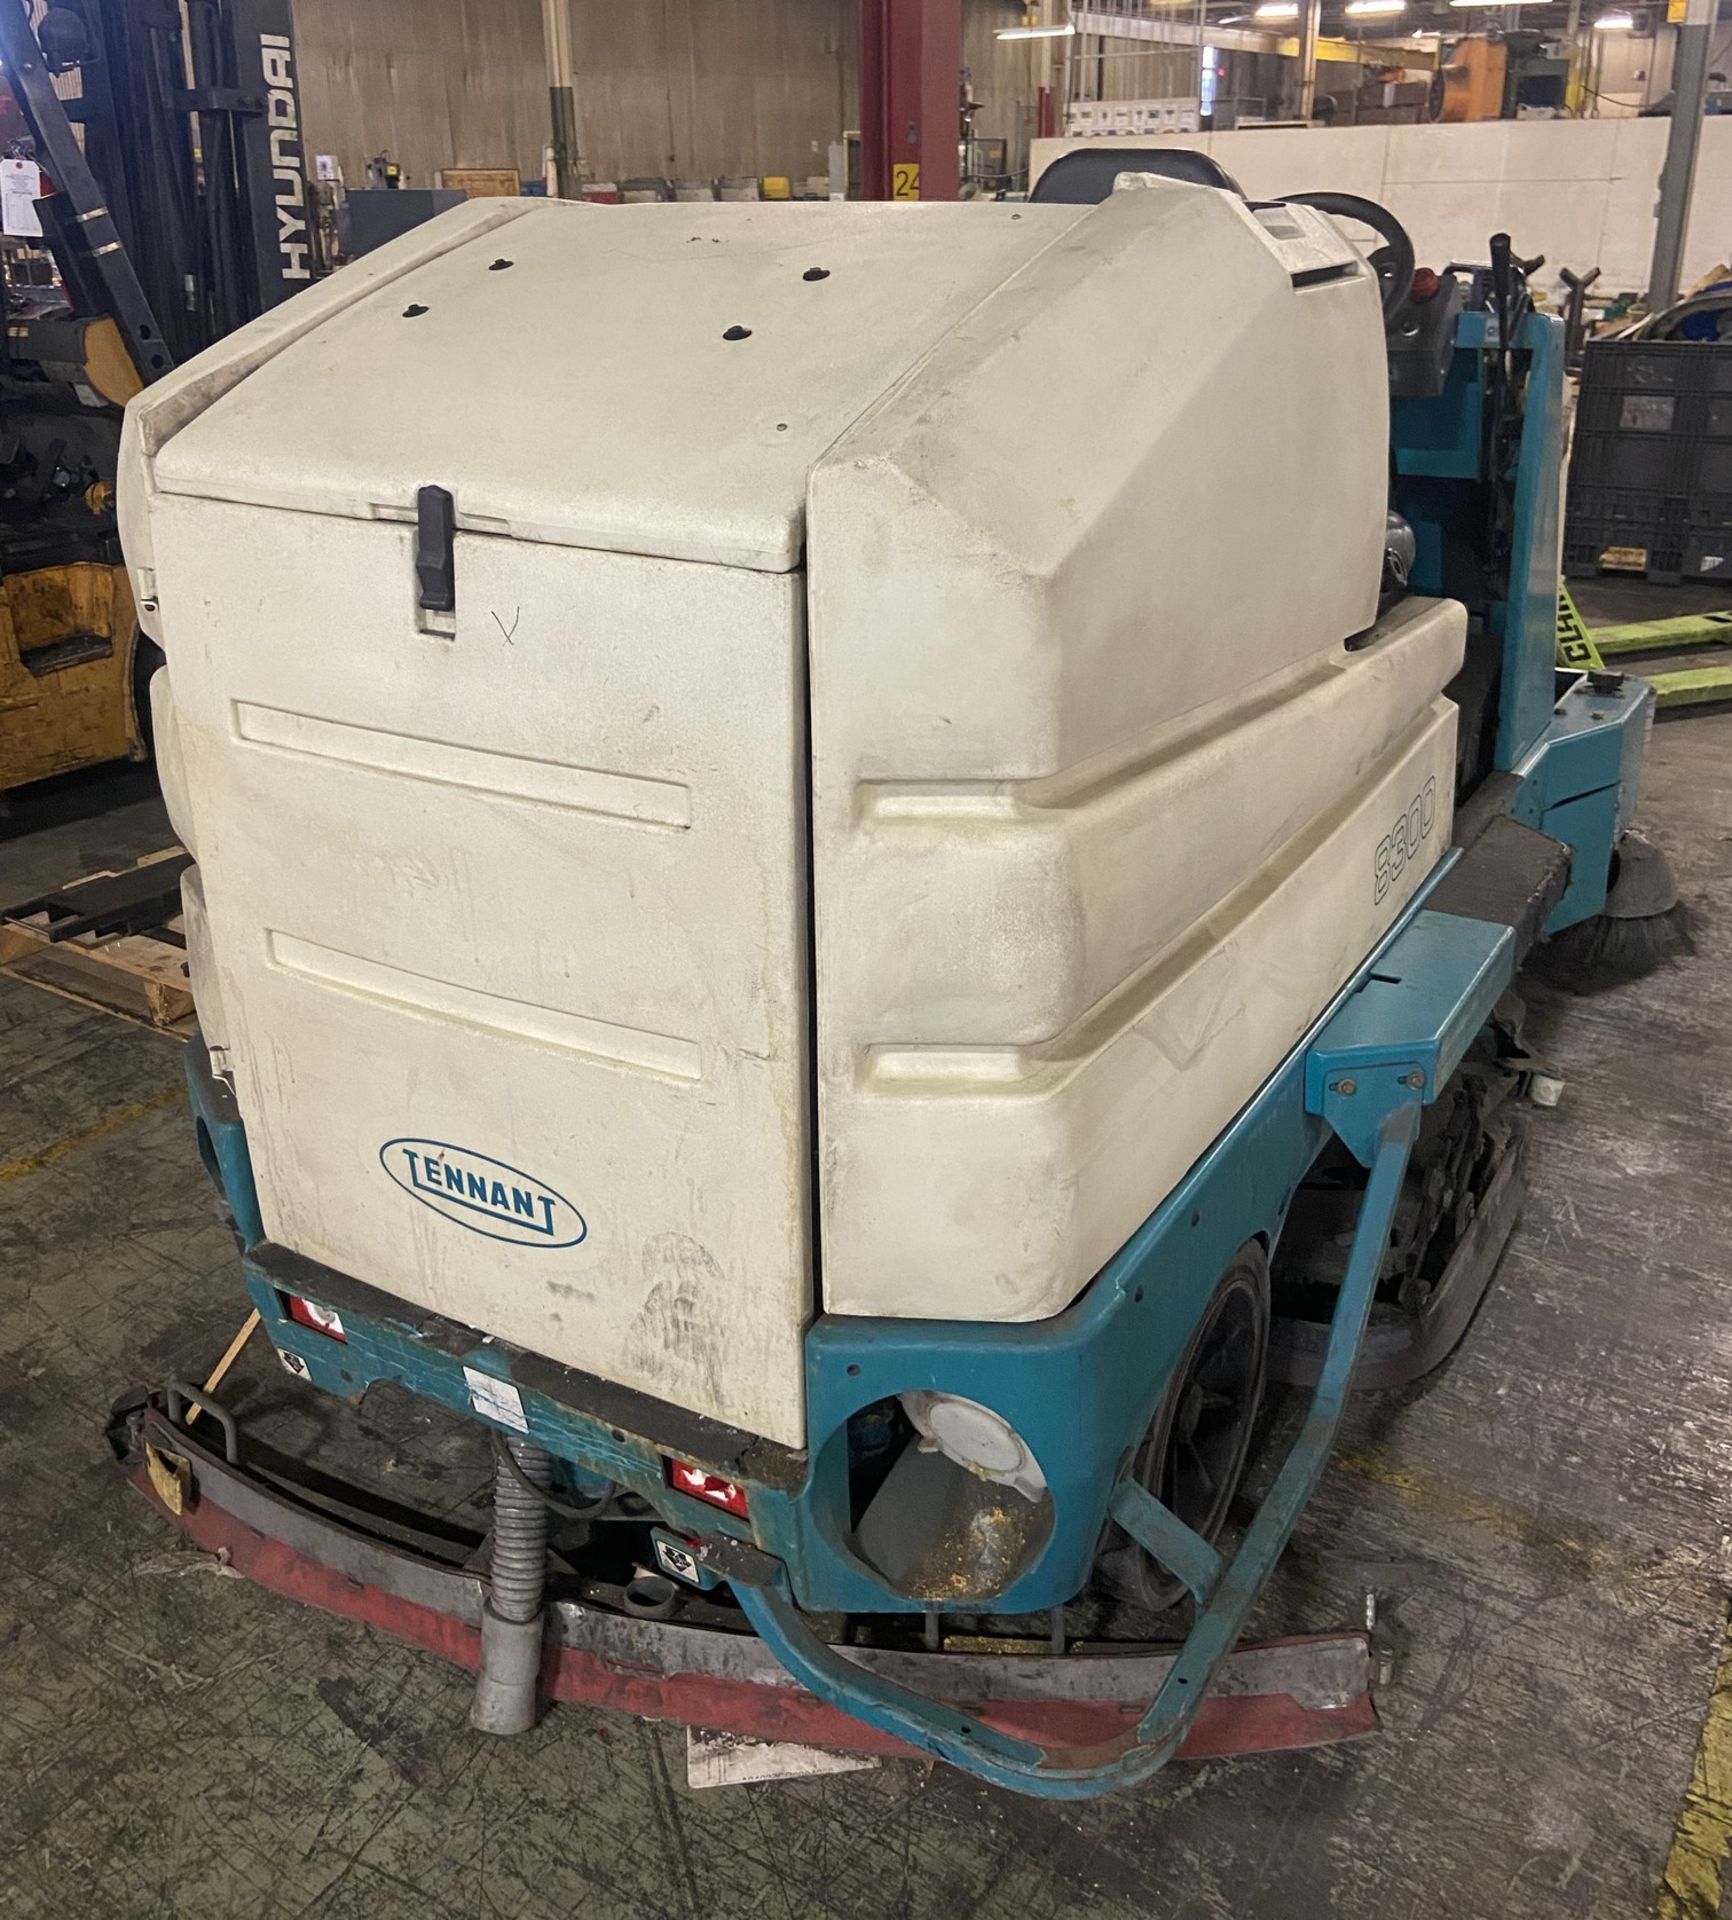 TENNANT 8300 RIDE-ON FLOOR SWEEPER WASHER (NOTE: UNIT MAY NEED ATTENTION AS CONDITION UNKNOWN) - Image 6 of 6